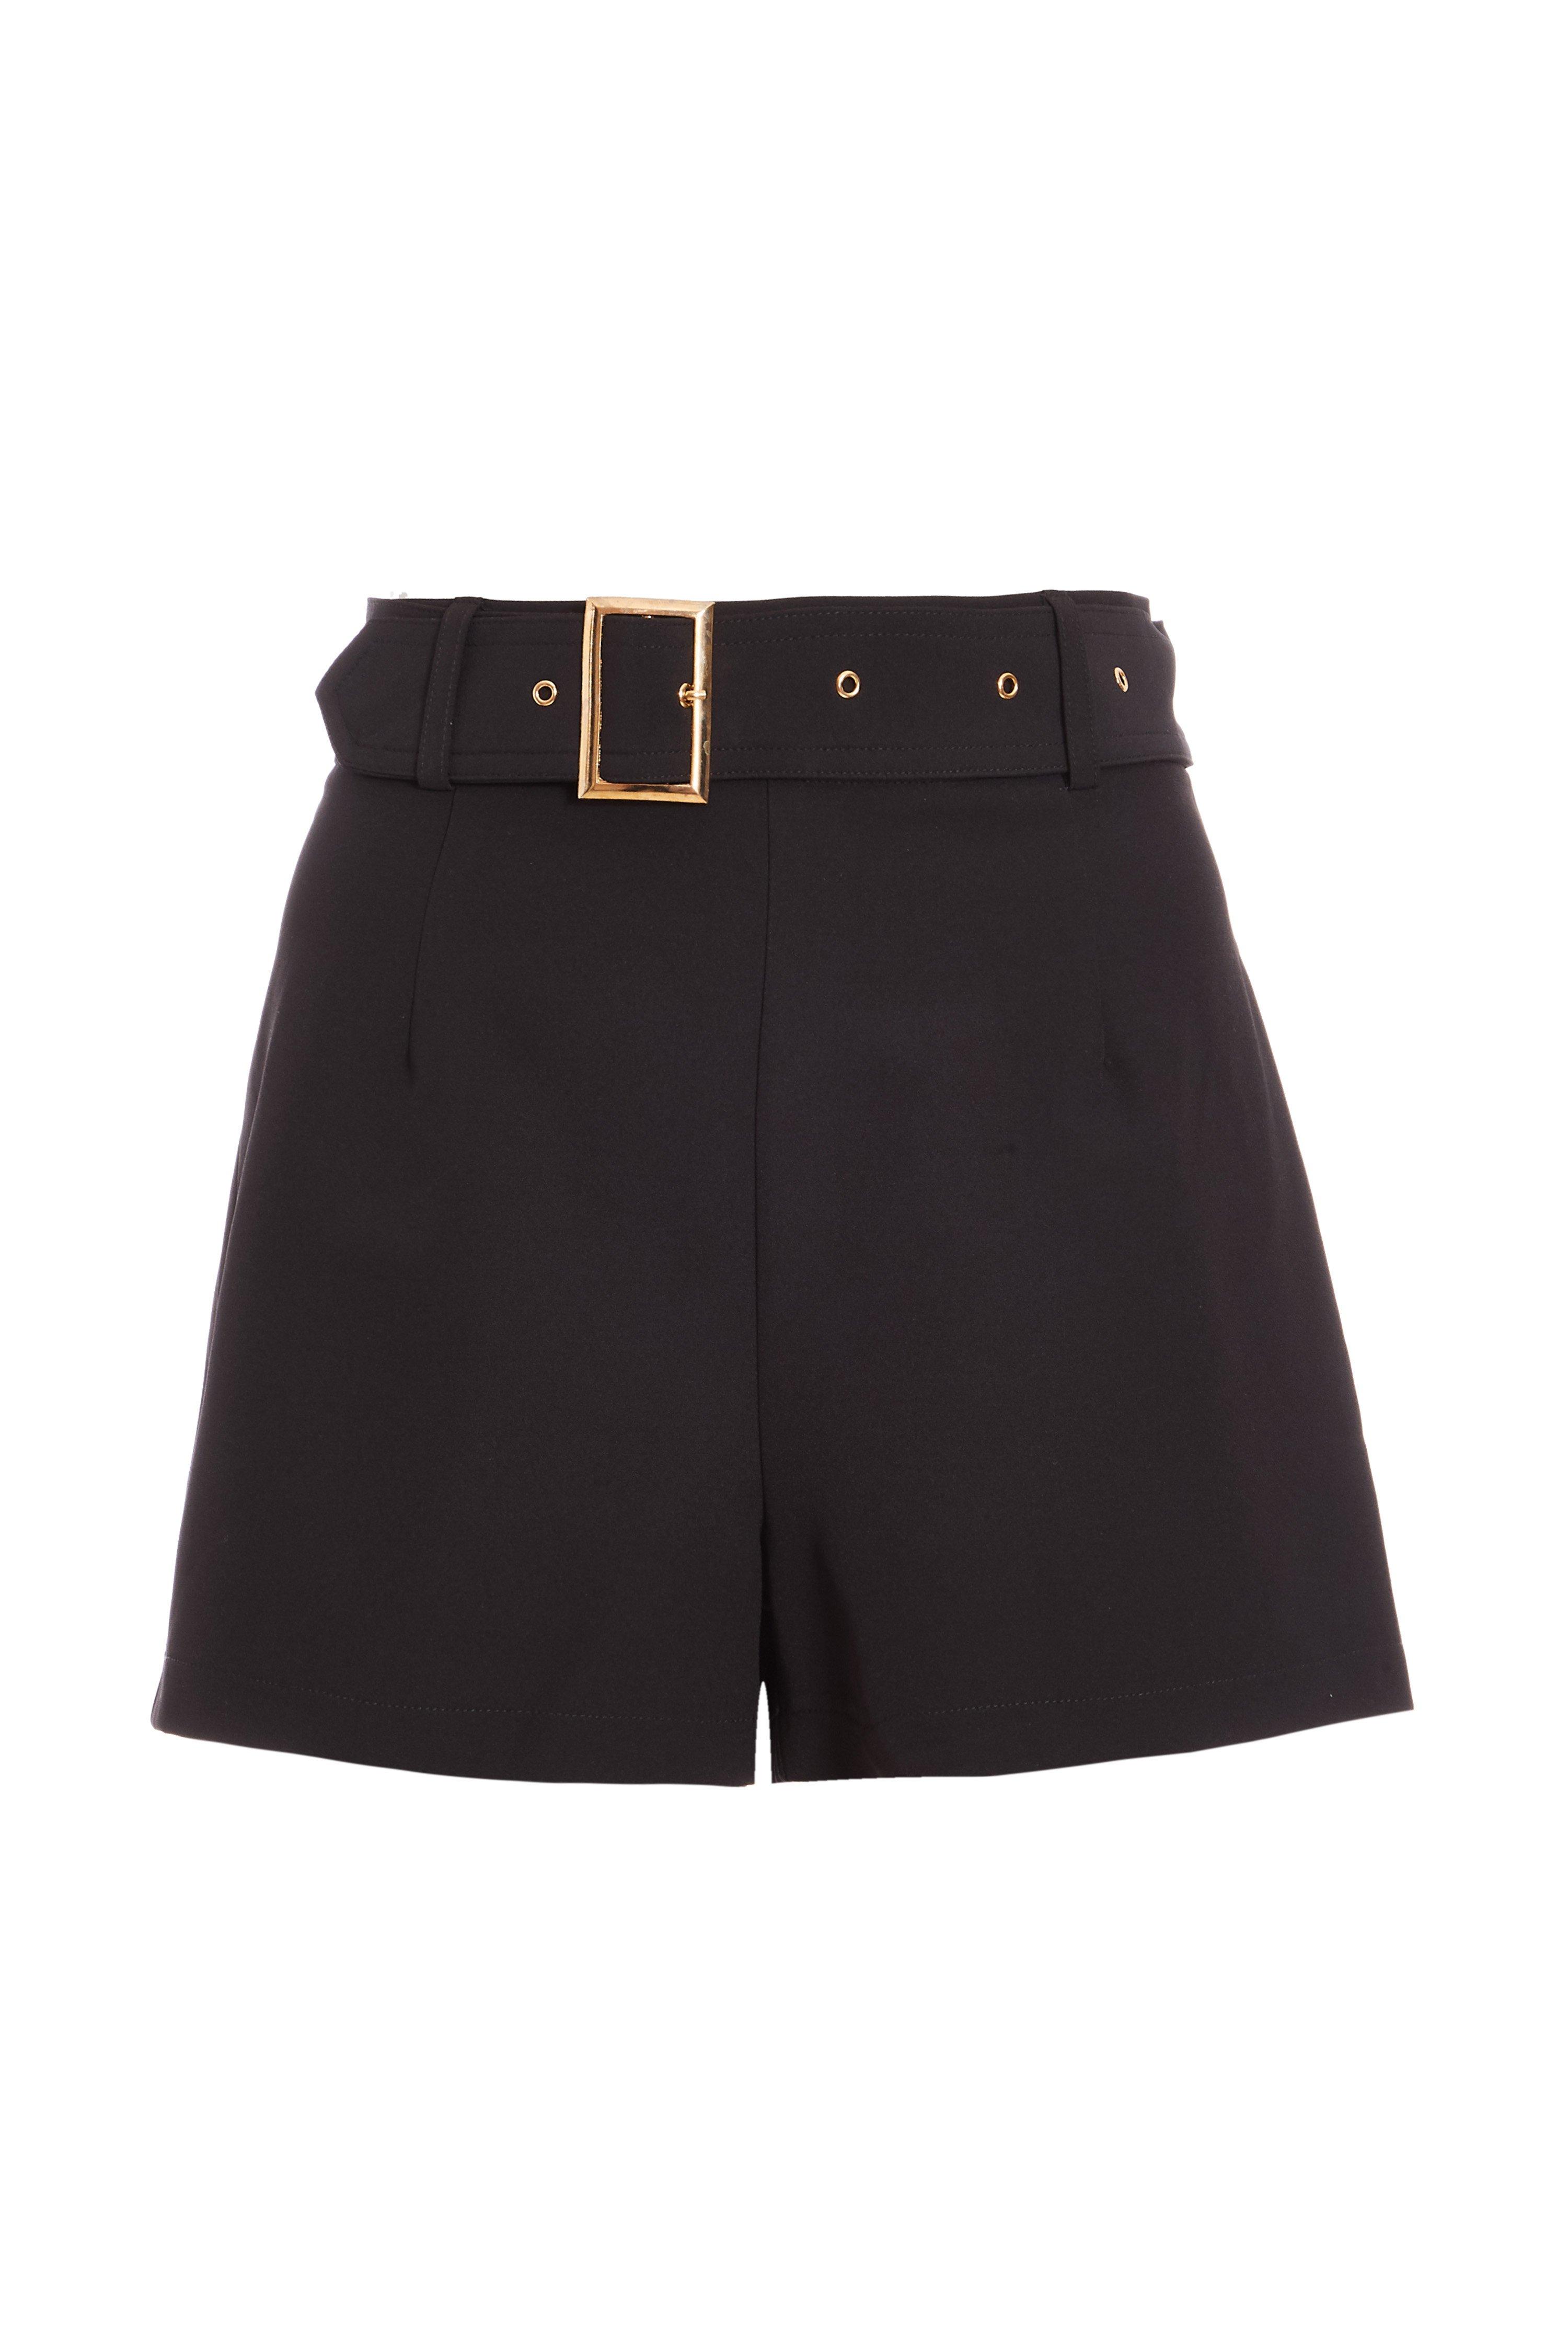 Black Woven Gold Buckle Shorts - Quiz Clothing